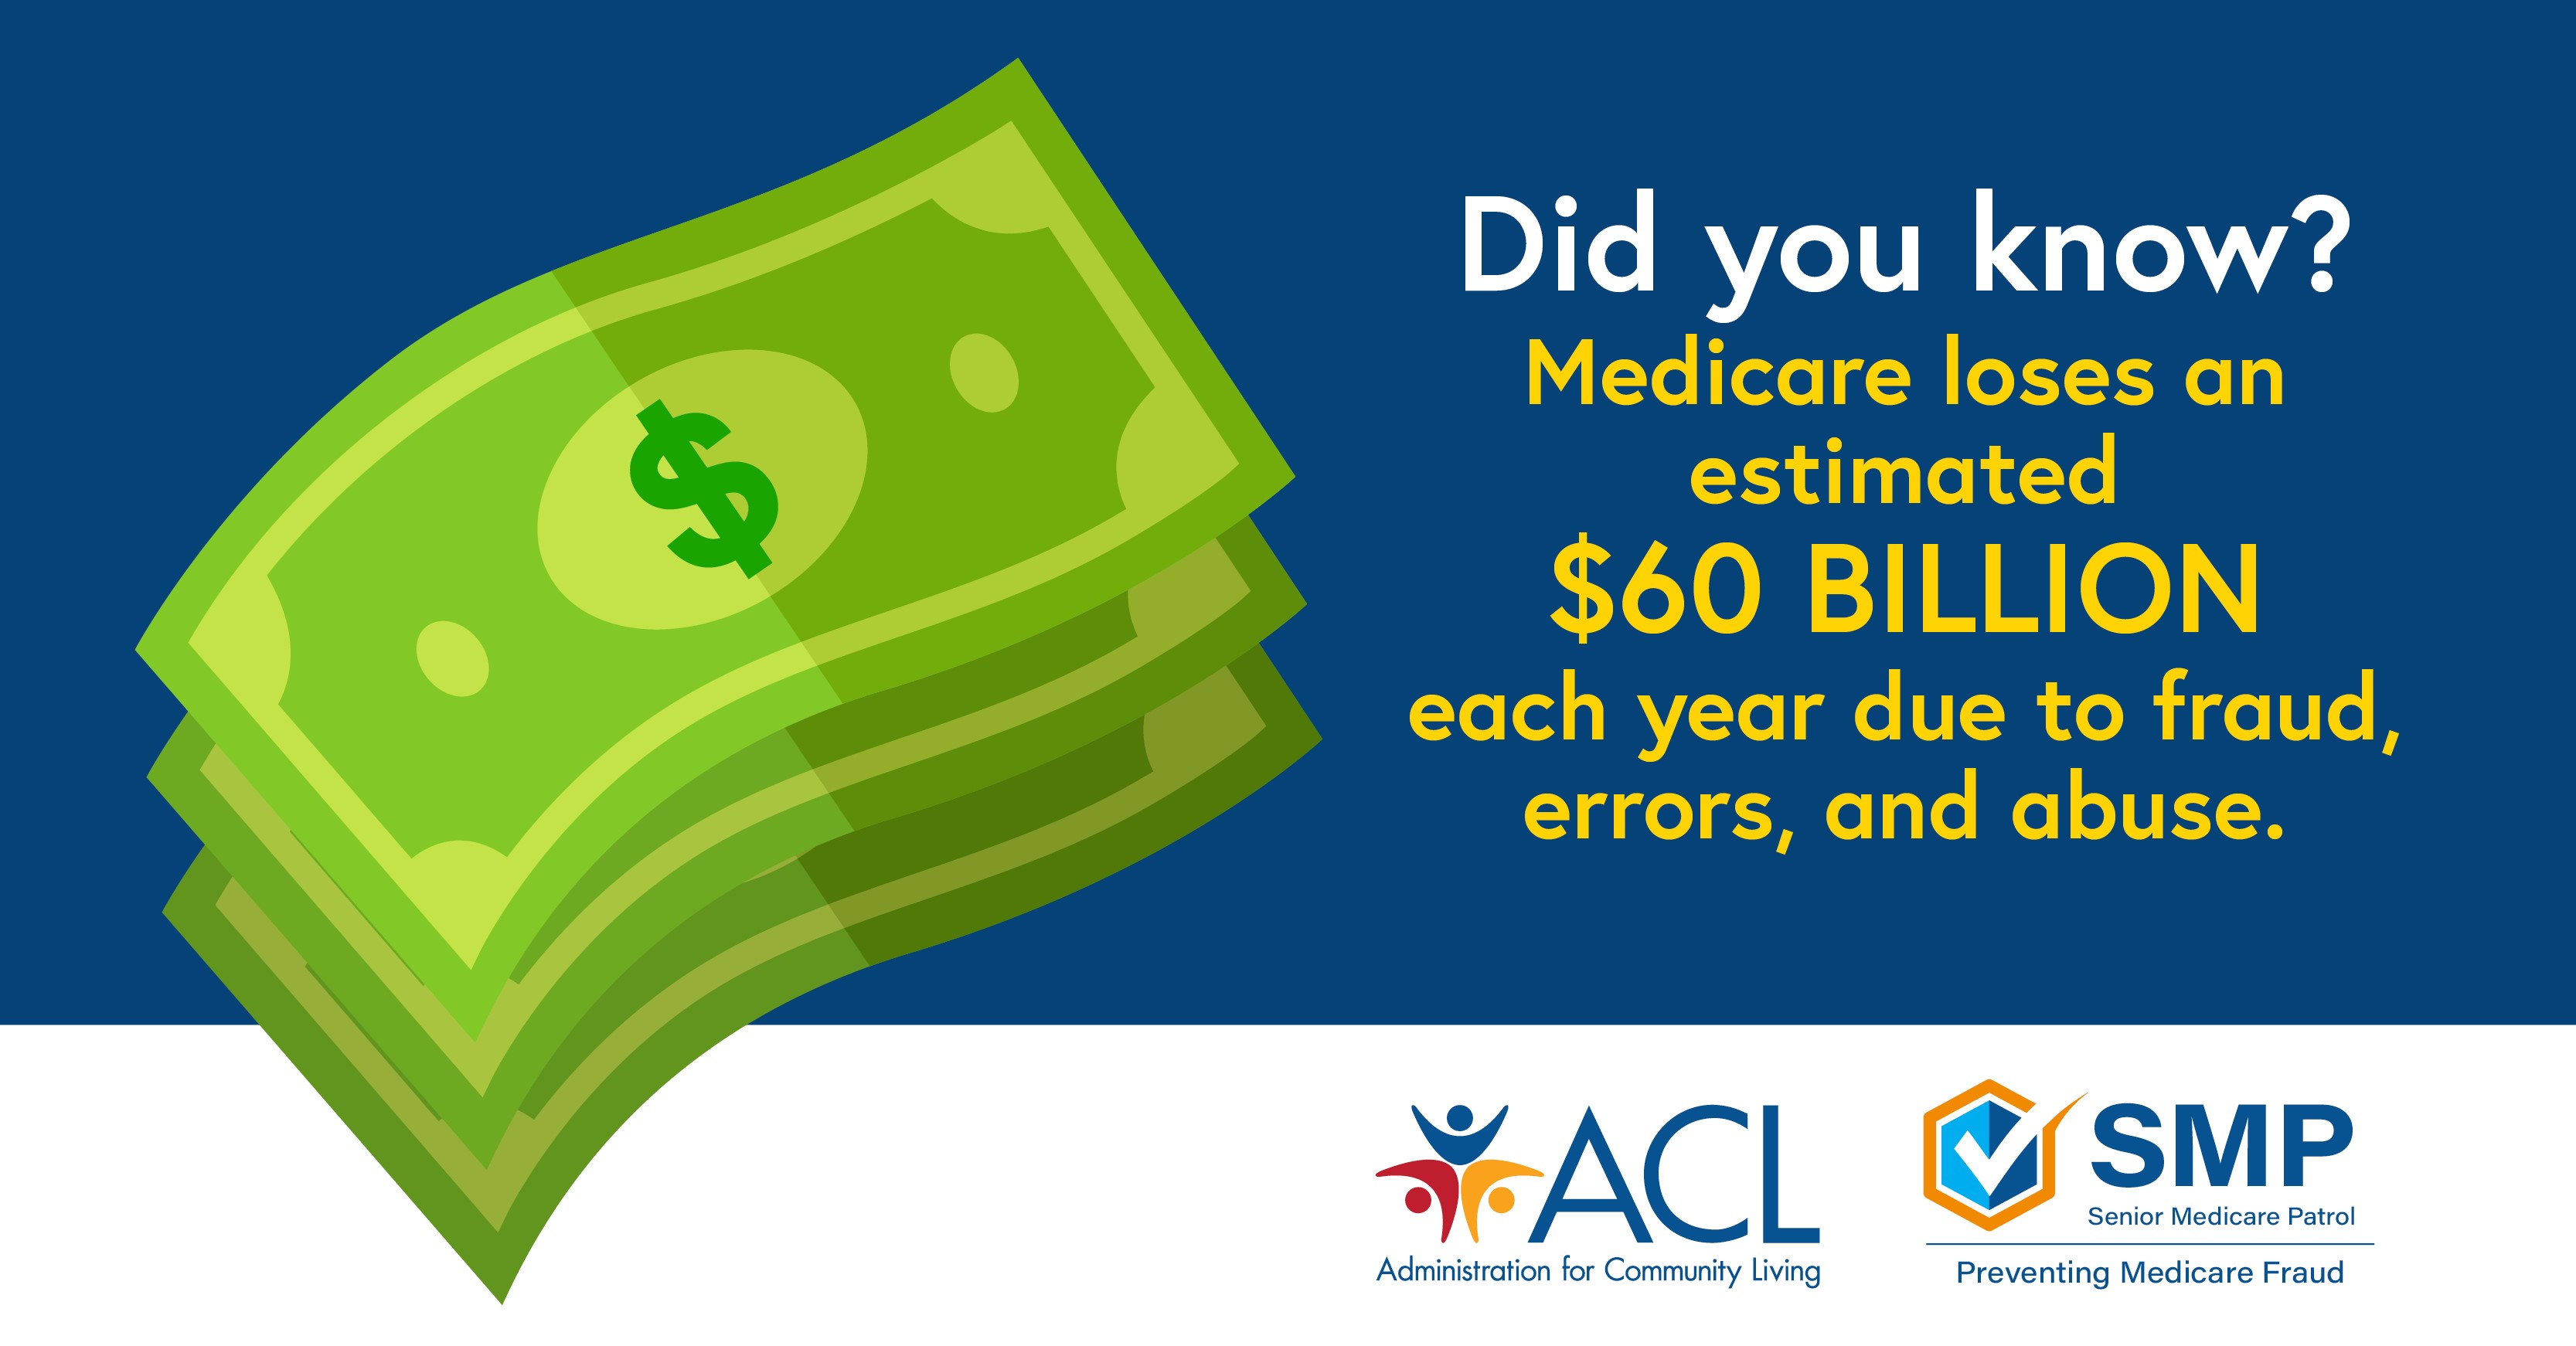 Did you know? Medicare loses an estimated $60 billion each year due to fraud, errors, and abuse. ACL, Administration for Community Living. SMP, Senior Medicare Patrol: Preventing Medicare Fraud.